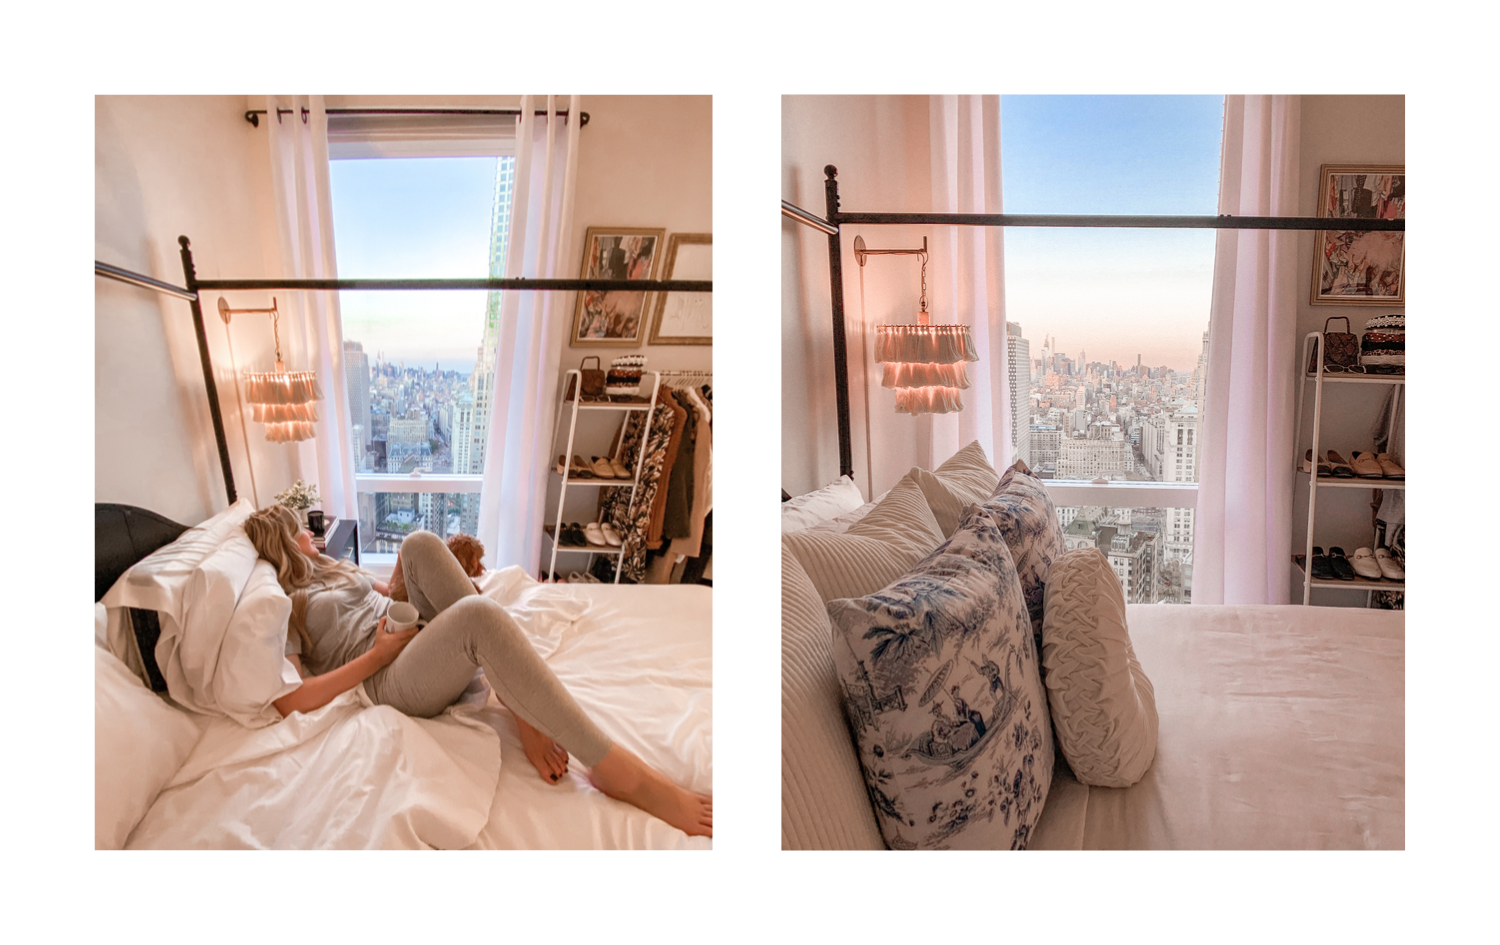 Anna relaxing in her bedroom with New York City skyline.